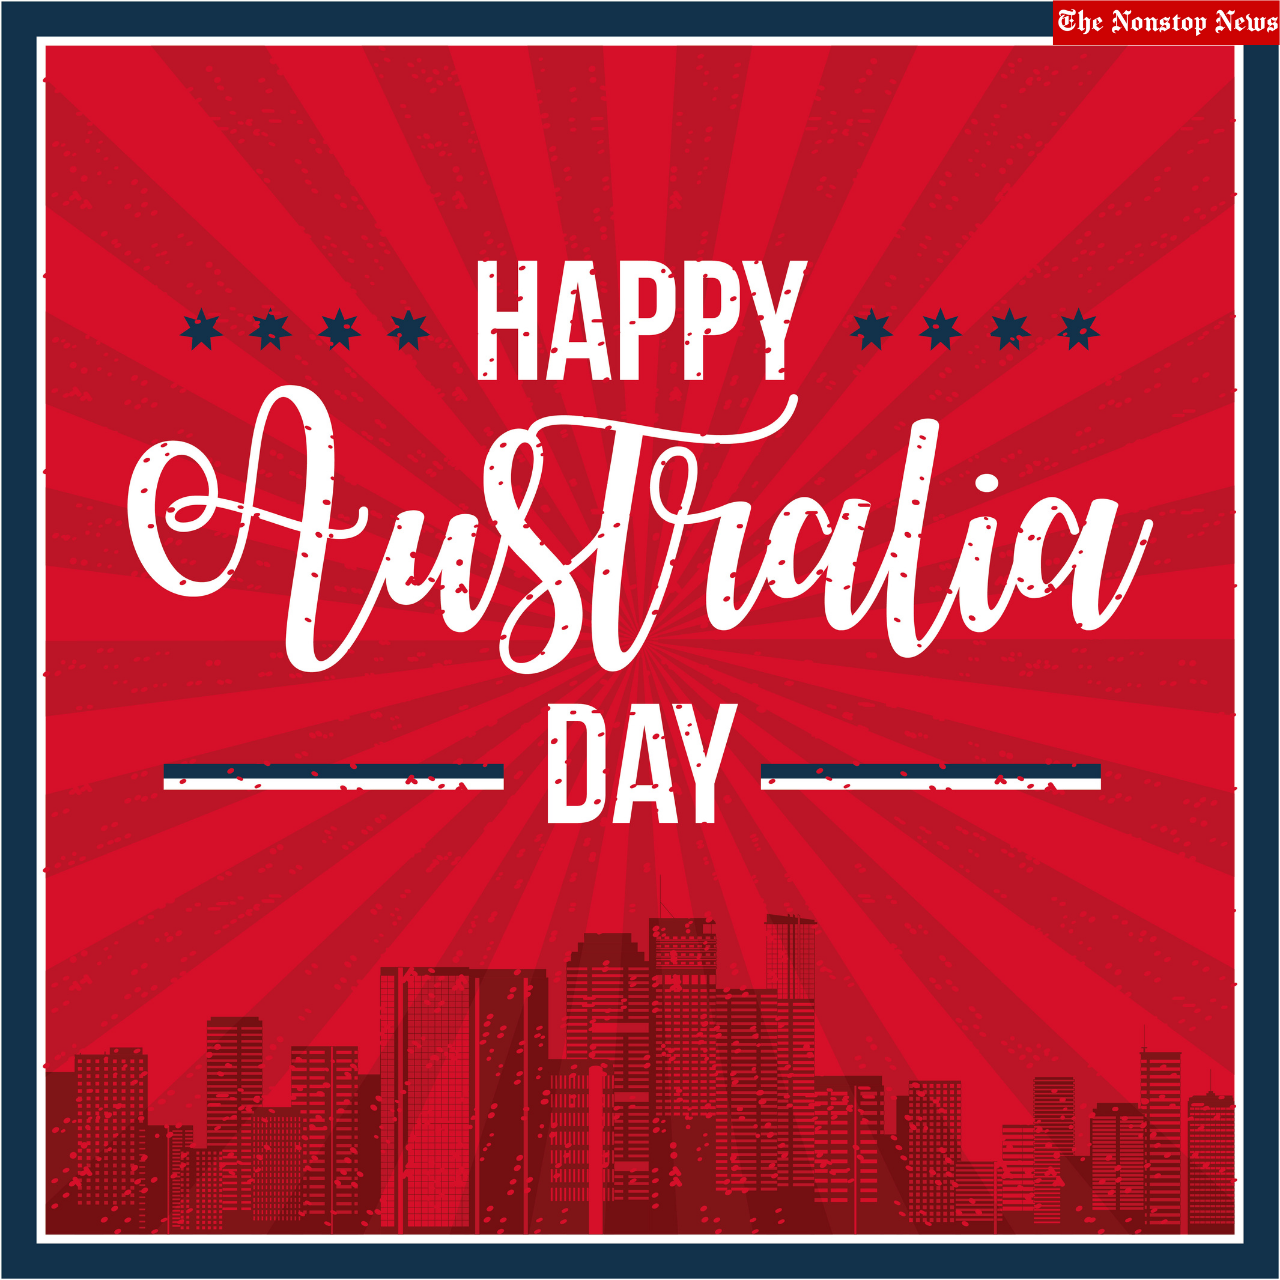 Australia Day 2022 Instagram Captions, Facebook Messages, Twitter Greetings, WhatsApp Stickers, Wallpapers, Posters, Banners to Share